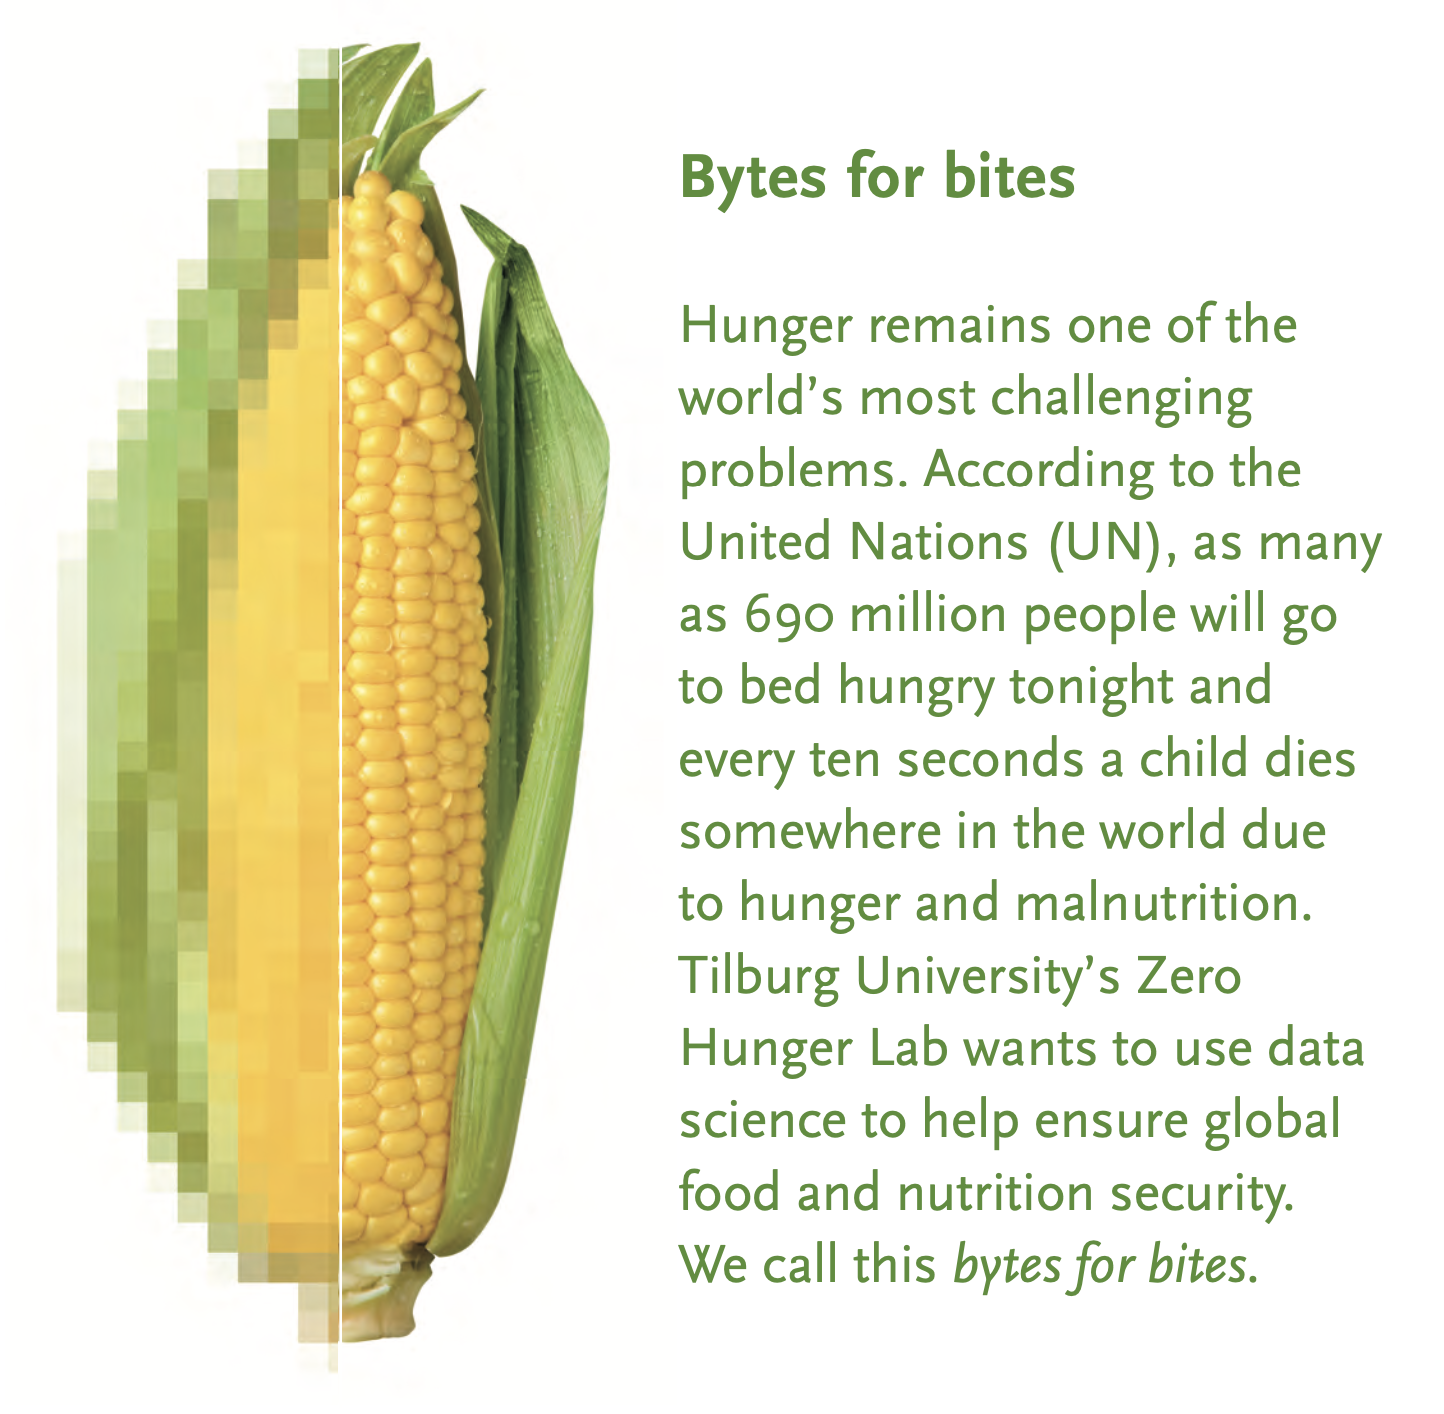 Hunger remains one of the world’s most challenging problems. According to the United Nations (UN), as many as 690 million people will go to bed hungry tonight and every ten seconds a child dies somewhere in the world due to hunger and malnutrition. Tilburg University’s Zero Hunger Lab wants to use data science to help ensure global food and nutrition security. We call this bytes for bites.